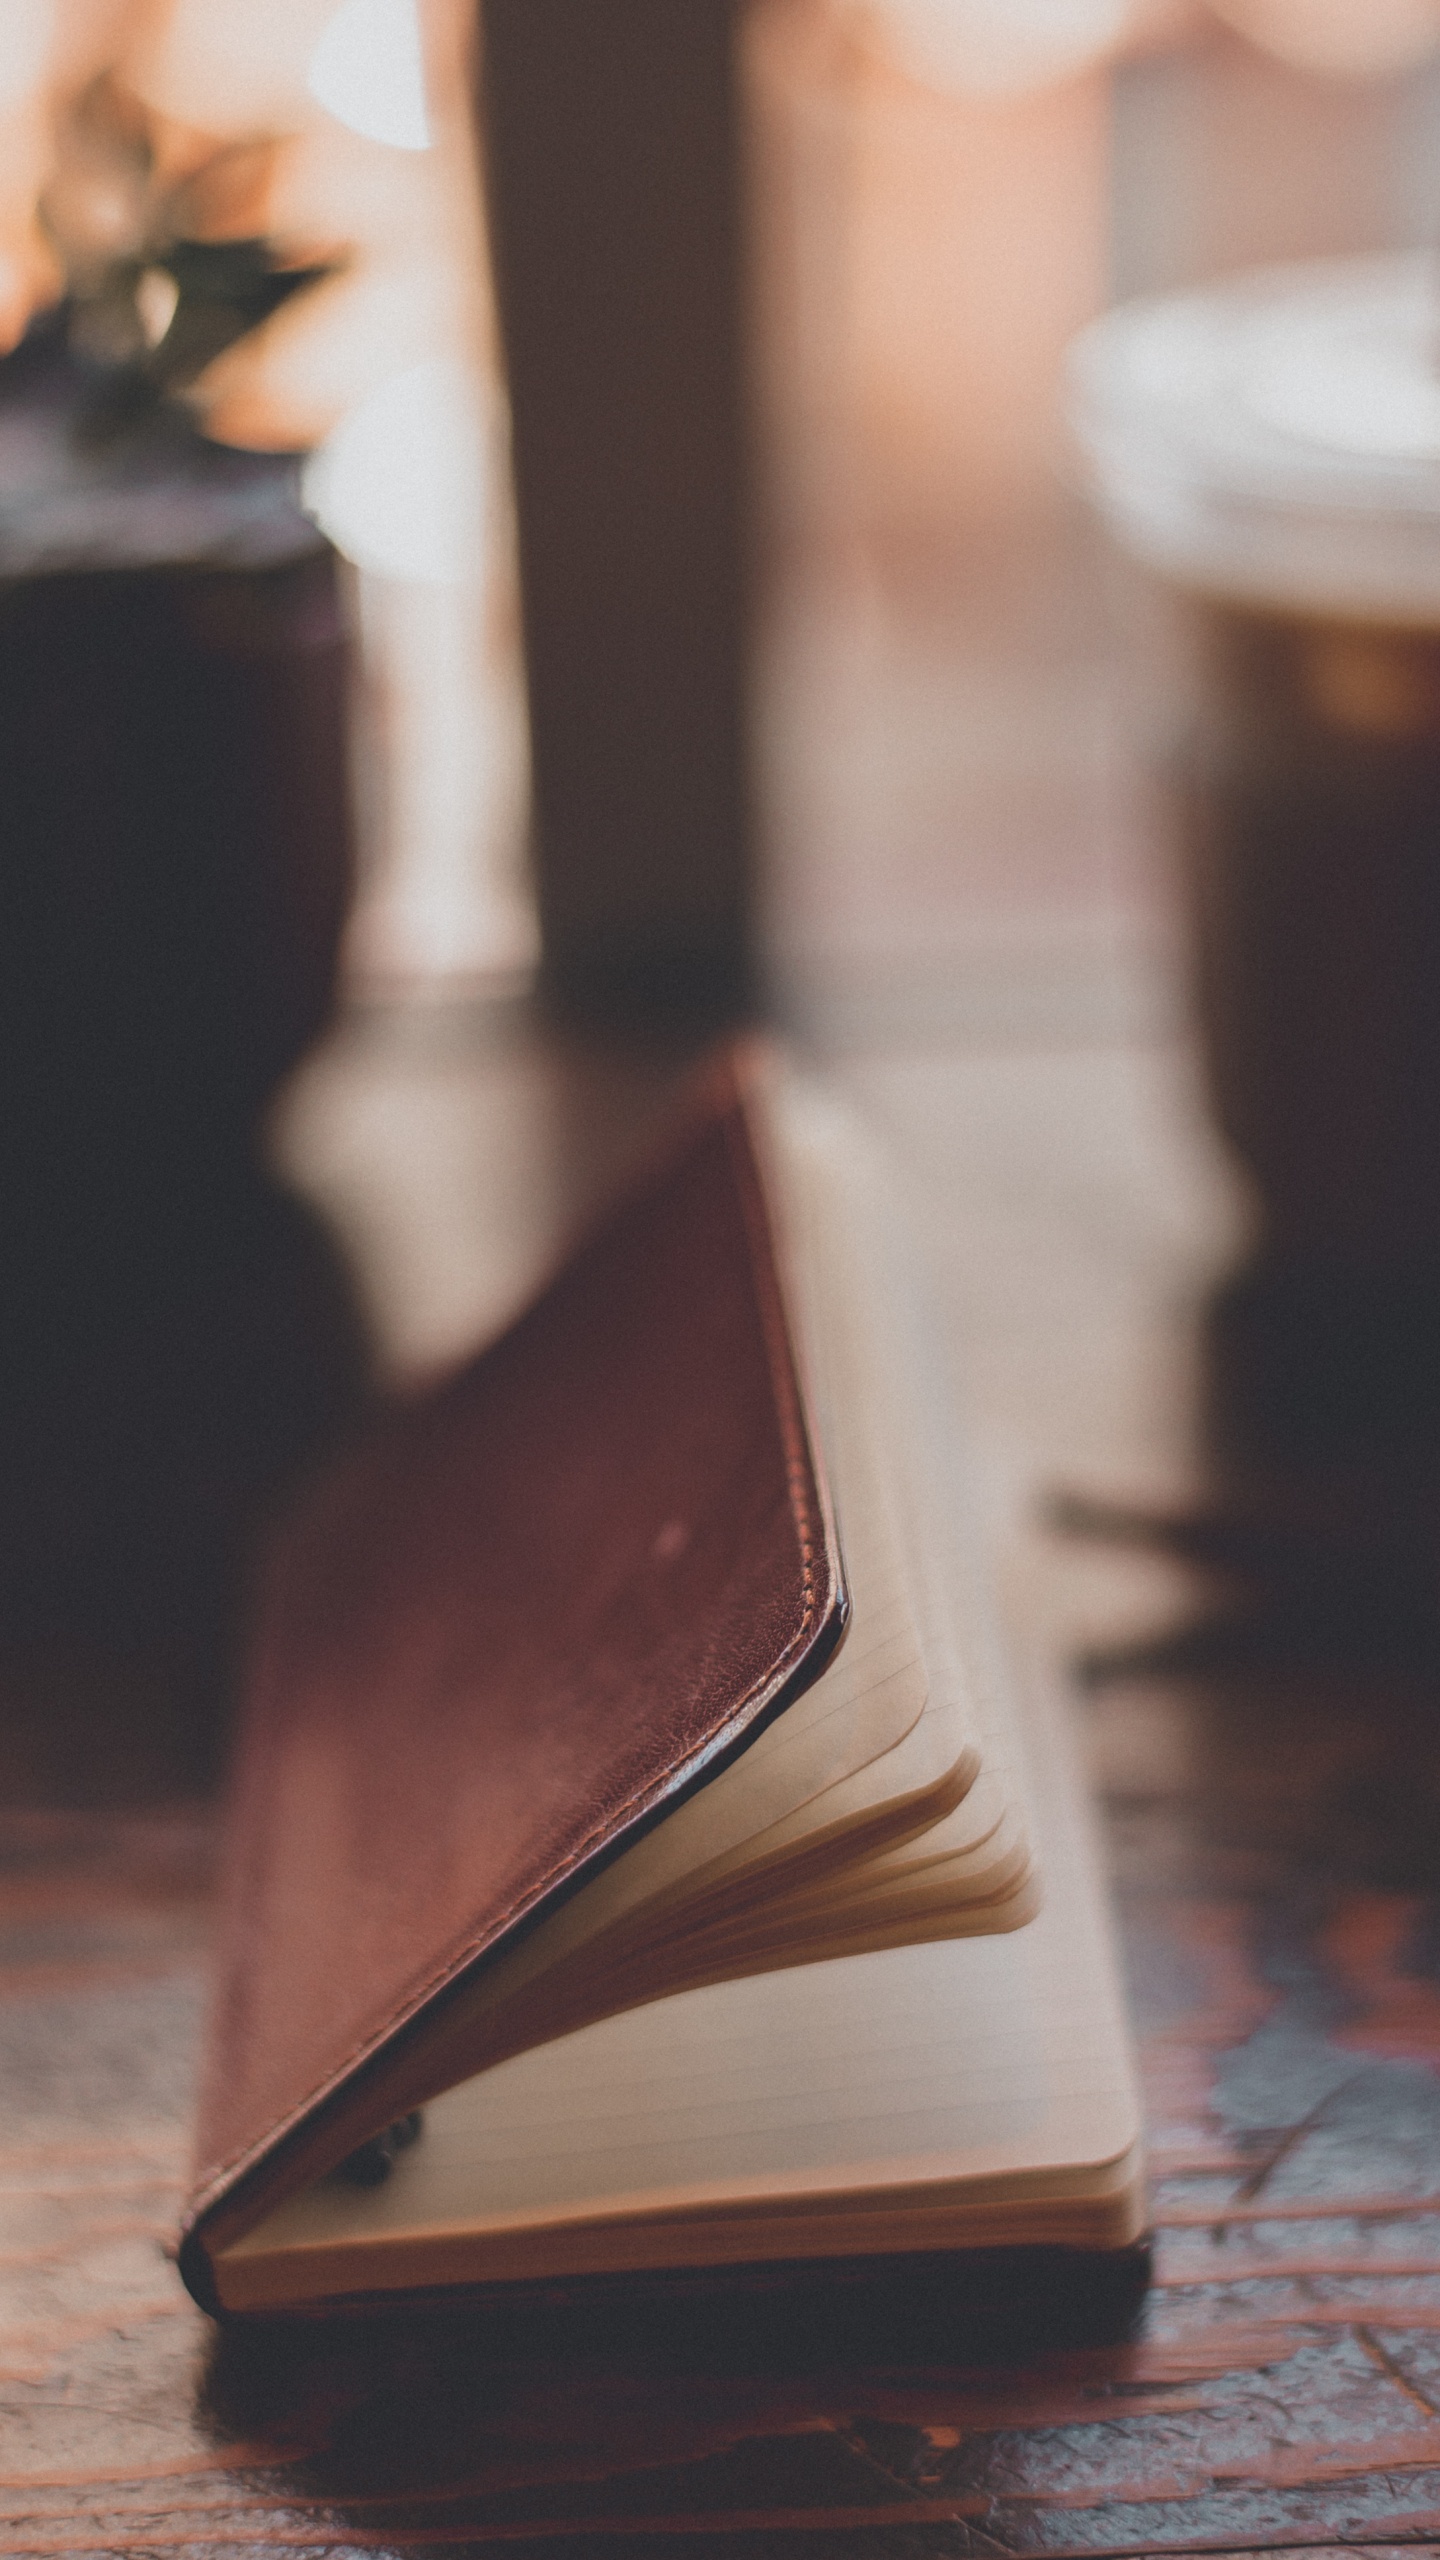 Brown Book on Brown Wooden Table. Wallpaper in 1440x2560 Resolution